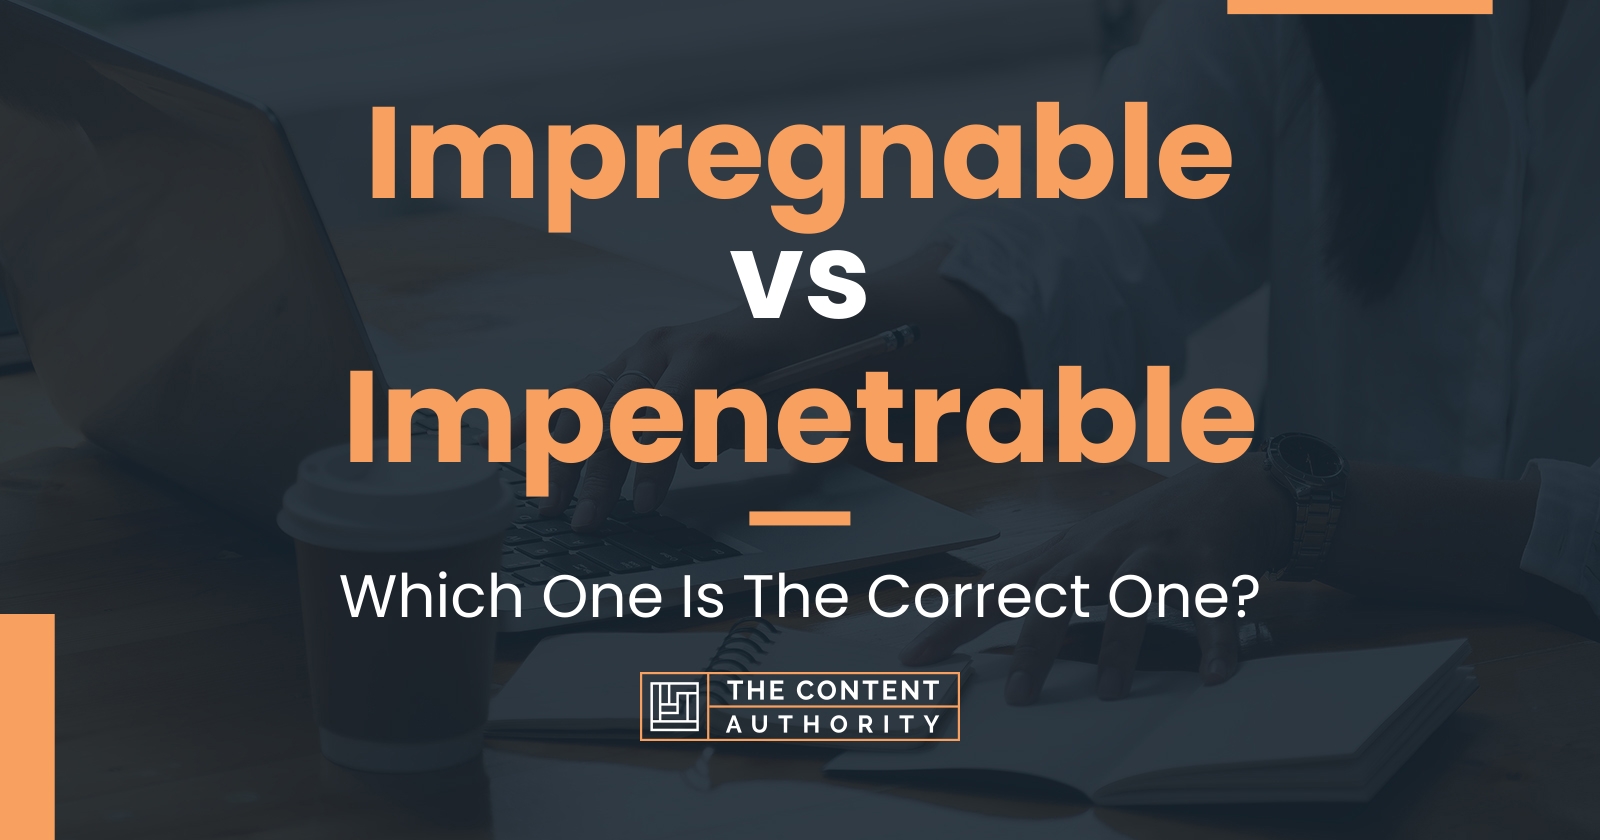 Impregnable vs Impenetrable: Which One Is The Correct One?